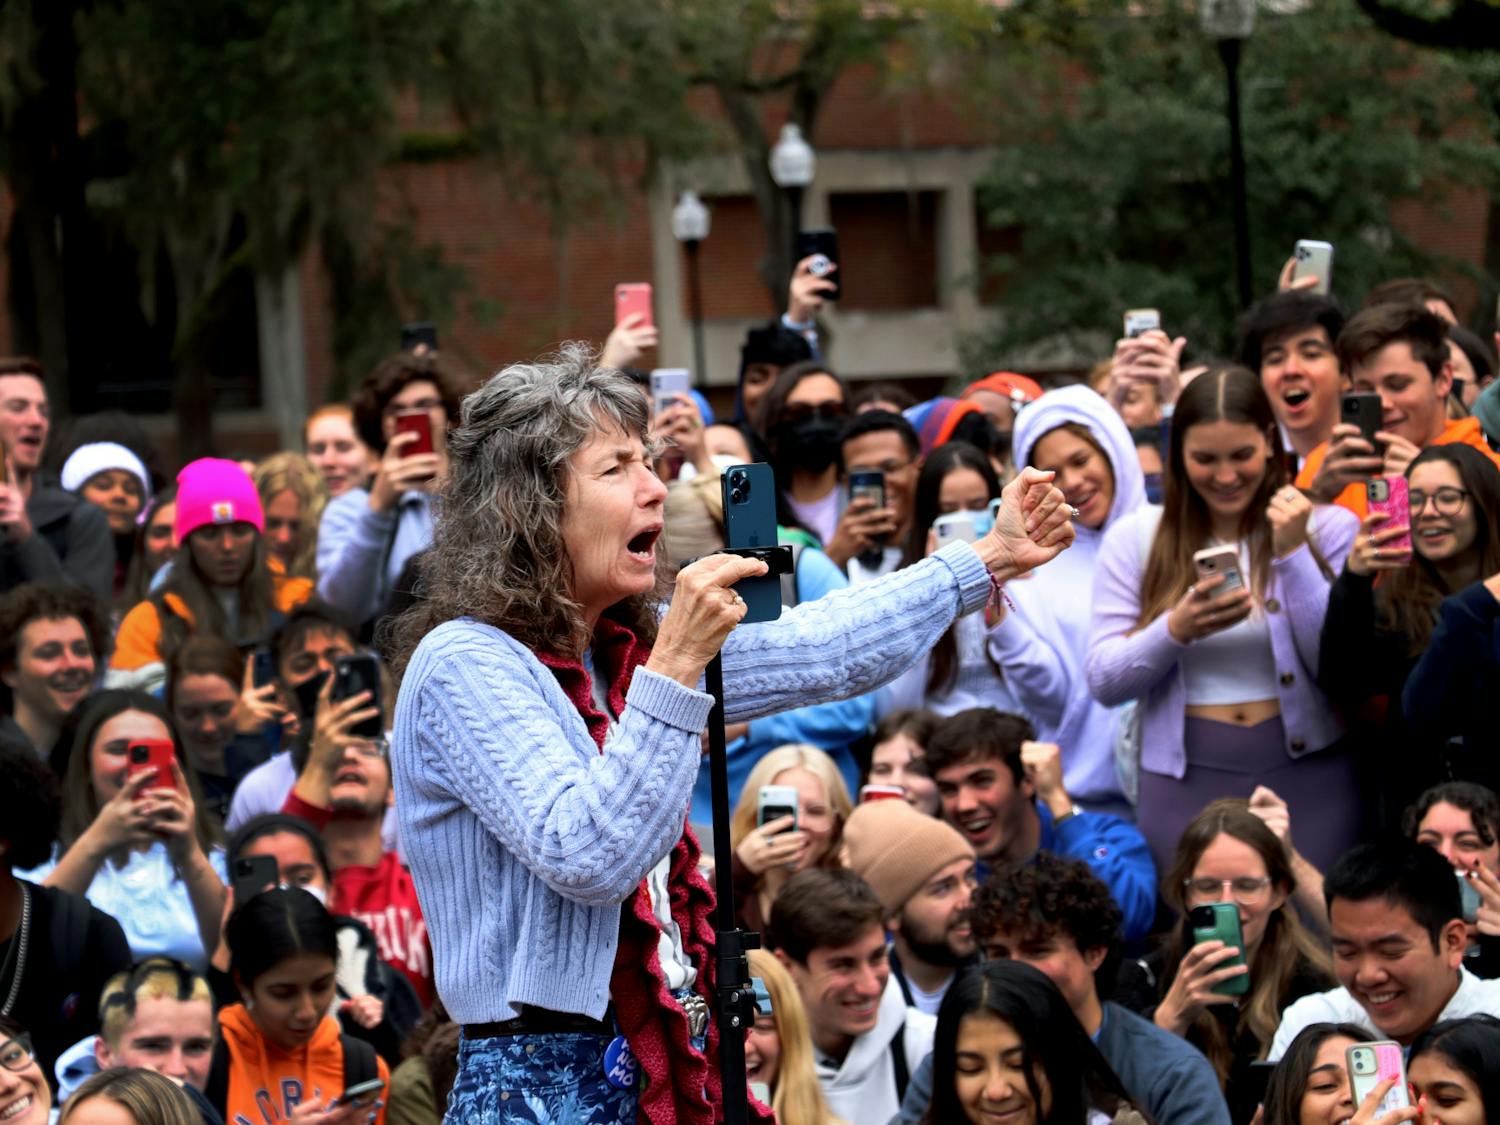 Cindy Lasseter Smock, better known to her more than 500,000 TikTok followers as “Sister Cindy,” came to Plaza of the Americas on Monday, Feb. 7.
A former UF student from the ‘70s, Smock came with her husband George Edward “Jed” Smock Jr., who she said converted her when she was a student.&nbsp;
A viral sensation, Smock was met with a crowd of over 500 students that dwindled throughout the day. She said on her TikTok that she will be at UF until Wednesday, Feb. 9.